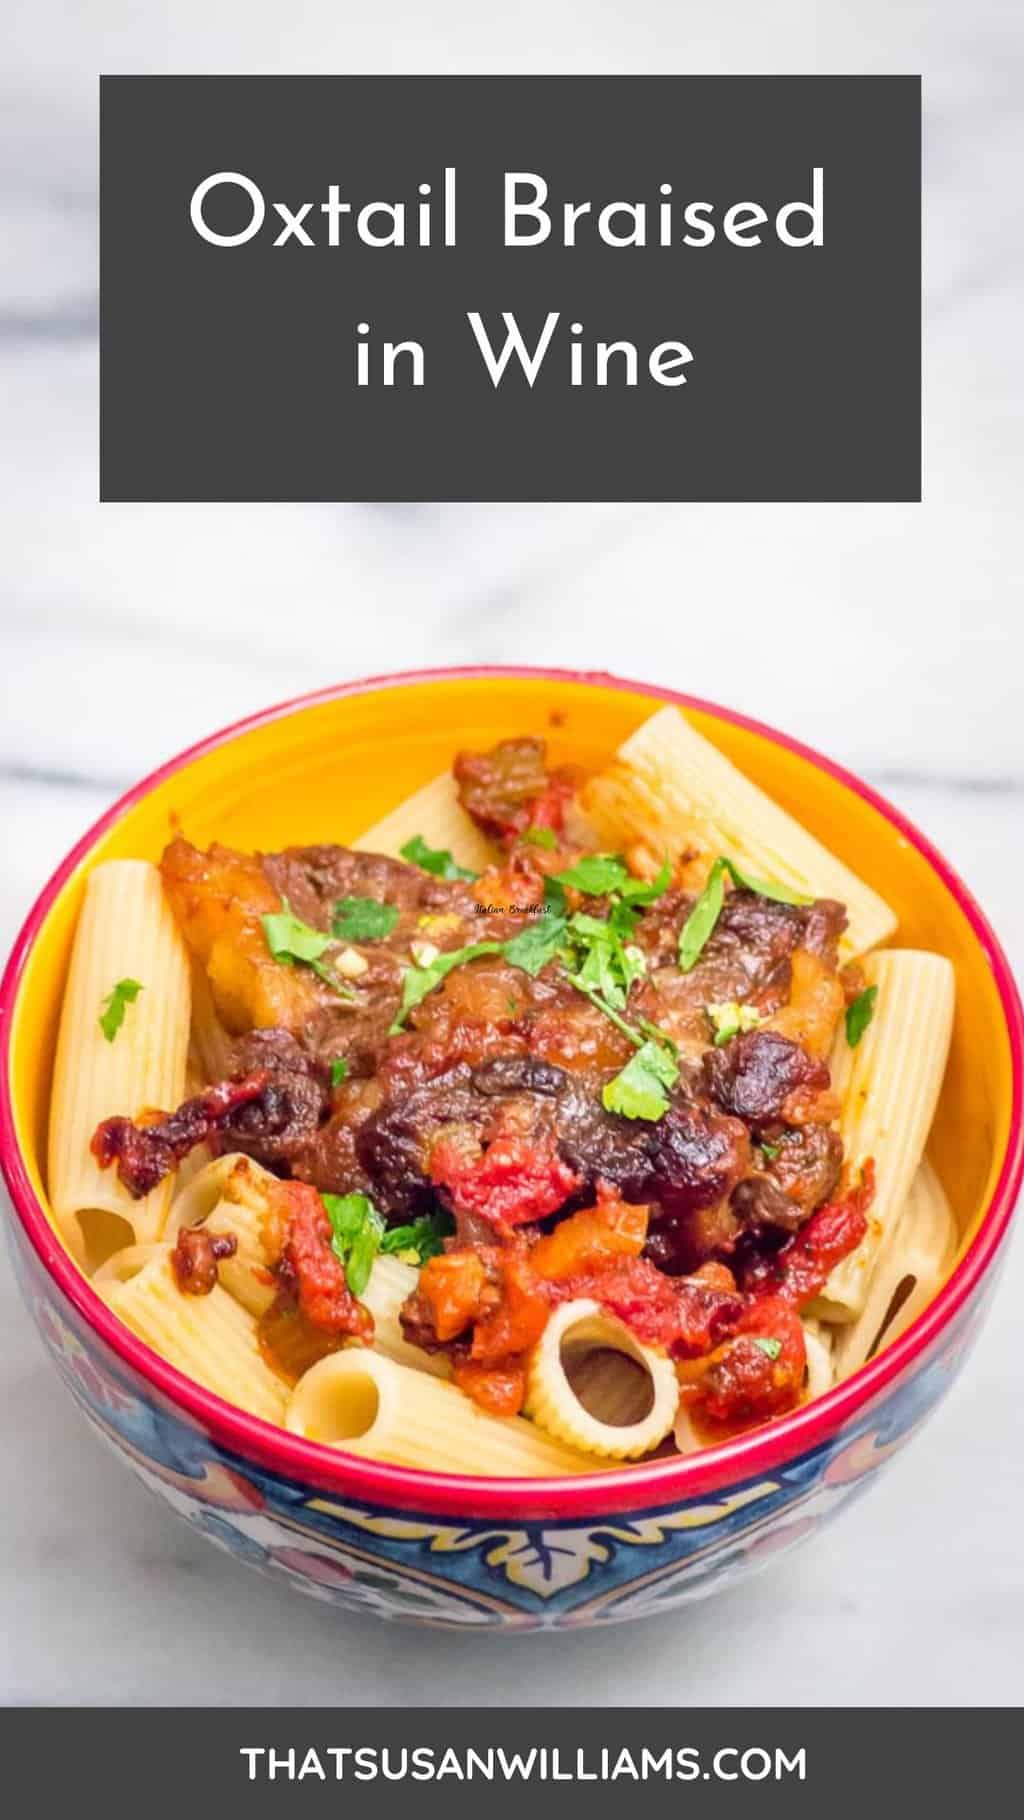 Oxtail Braised in Wine, served over rigatoni pasta.